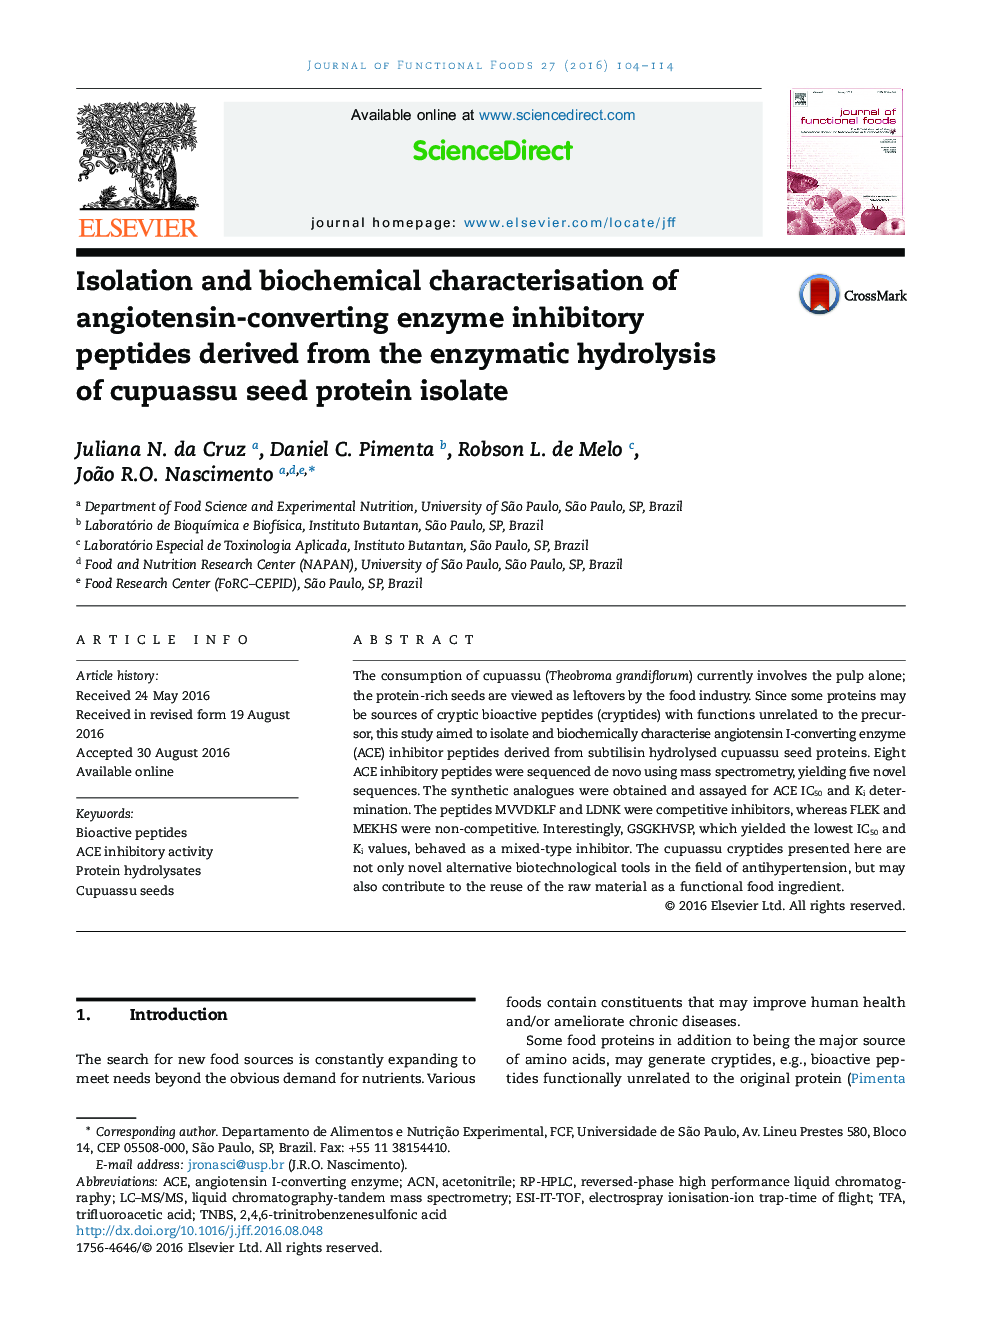 Isolation and biochemical characterisation of angiotensin-converting enzyme inhibitory peptides derived from the enzymatic hydrolysis of cupuassu seed protein isolate